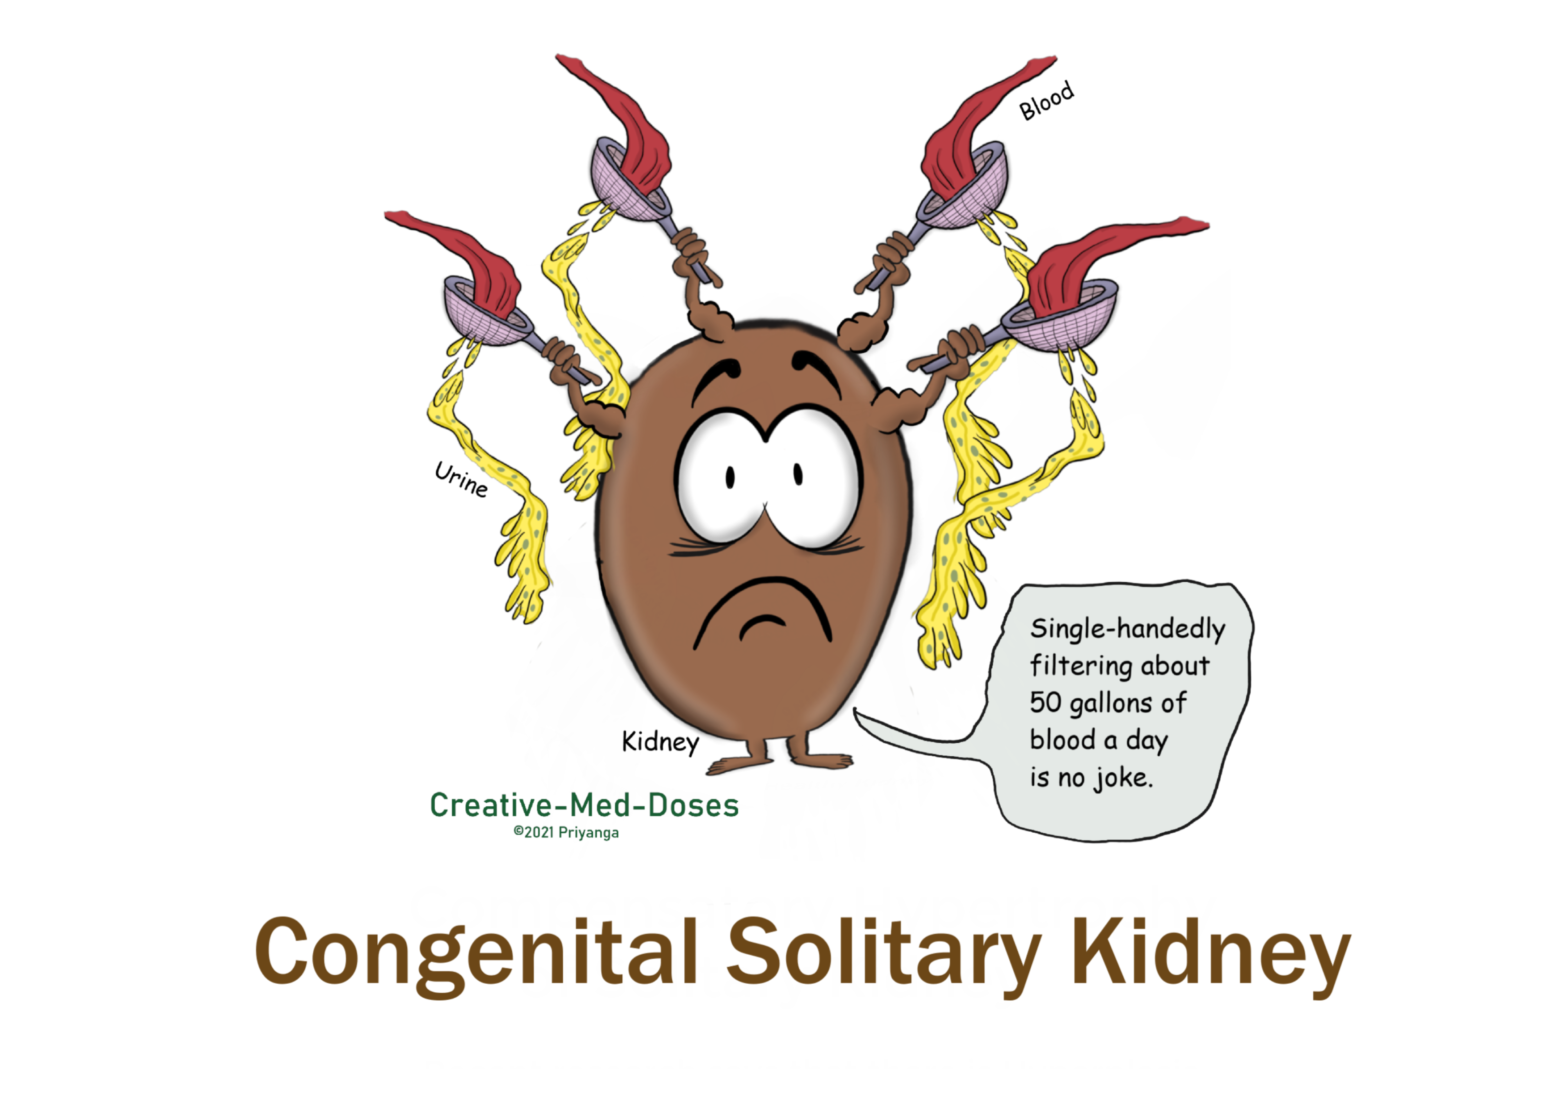 Congenital Solitary Kidney introduction slide